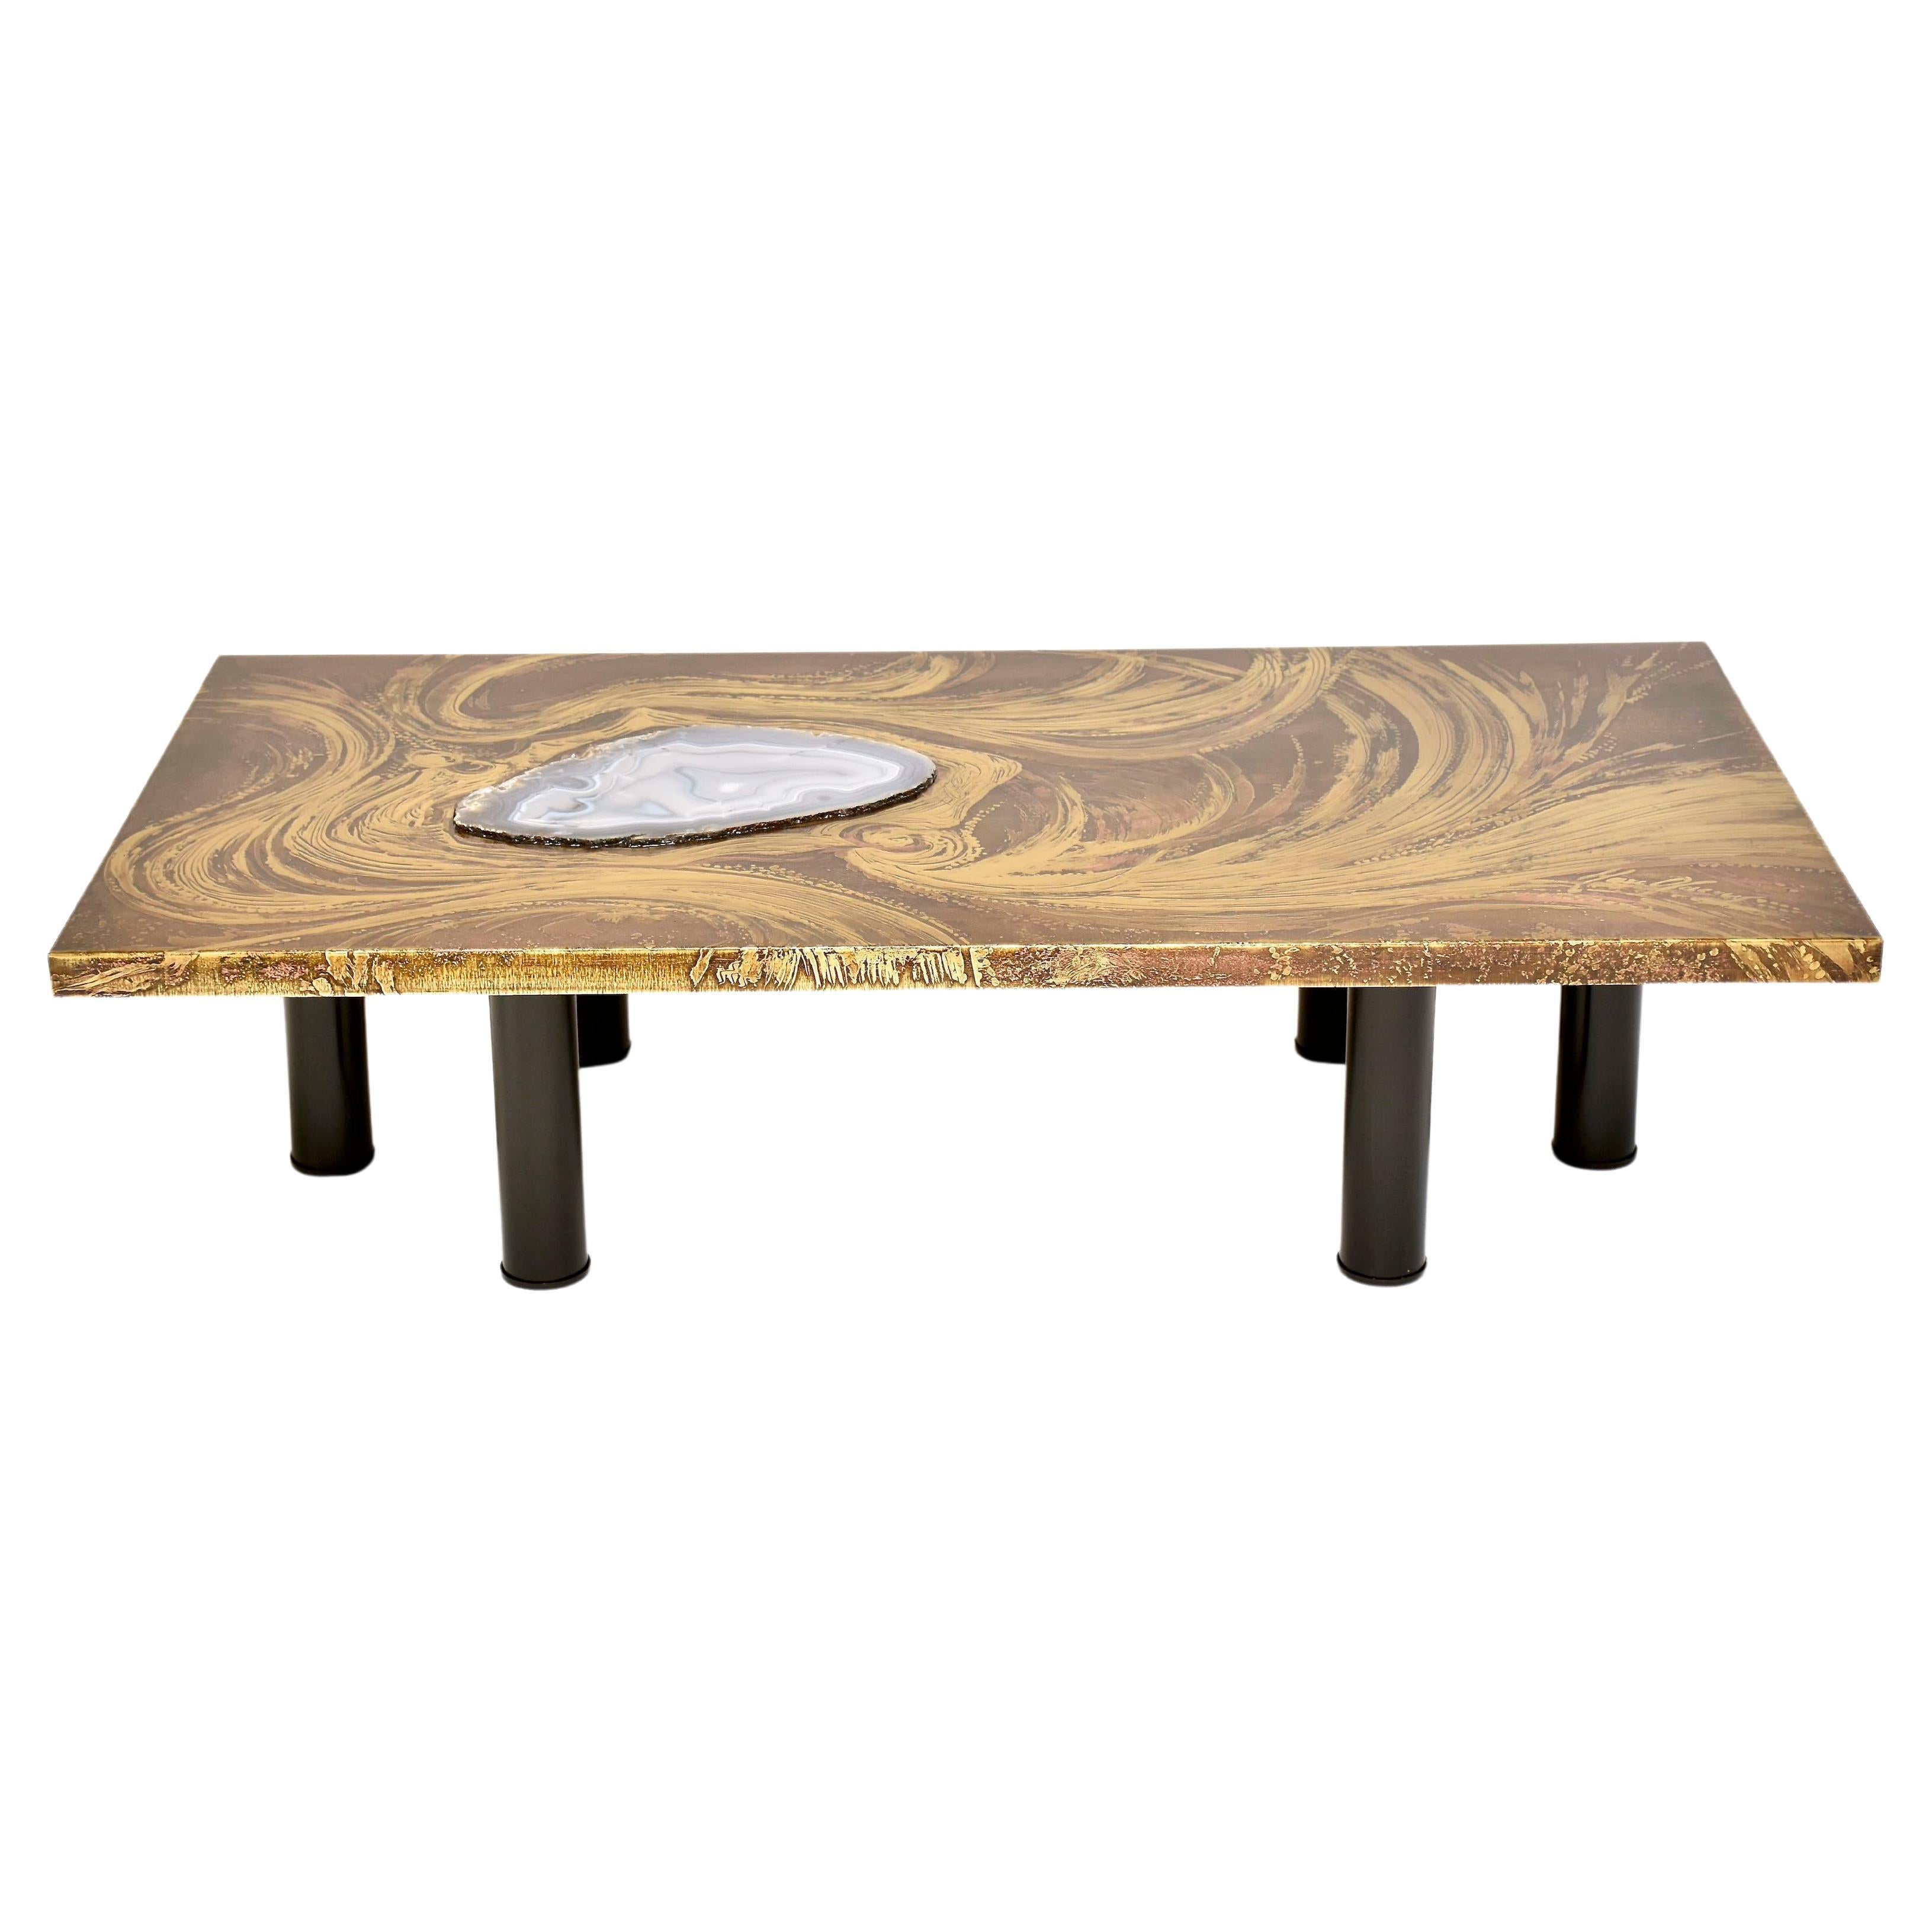 Brass etched coffee table by Marc D'Haenens with agate inlay